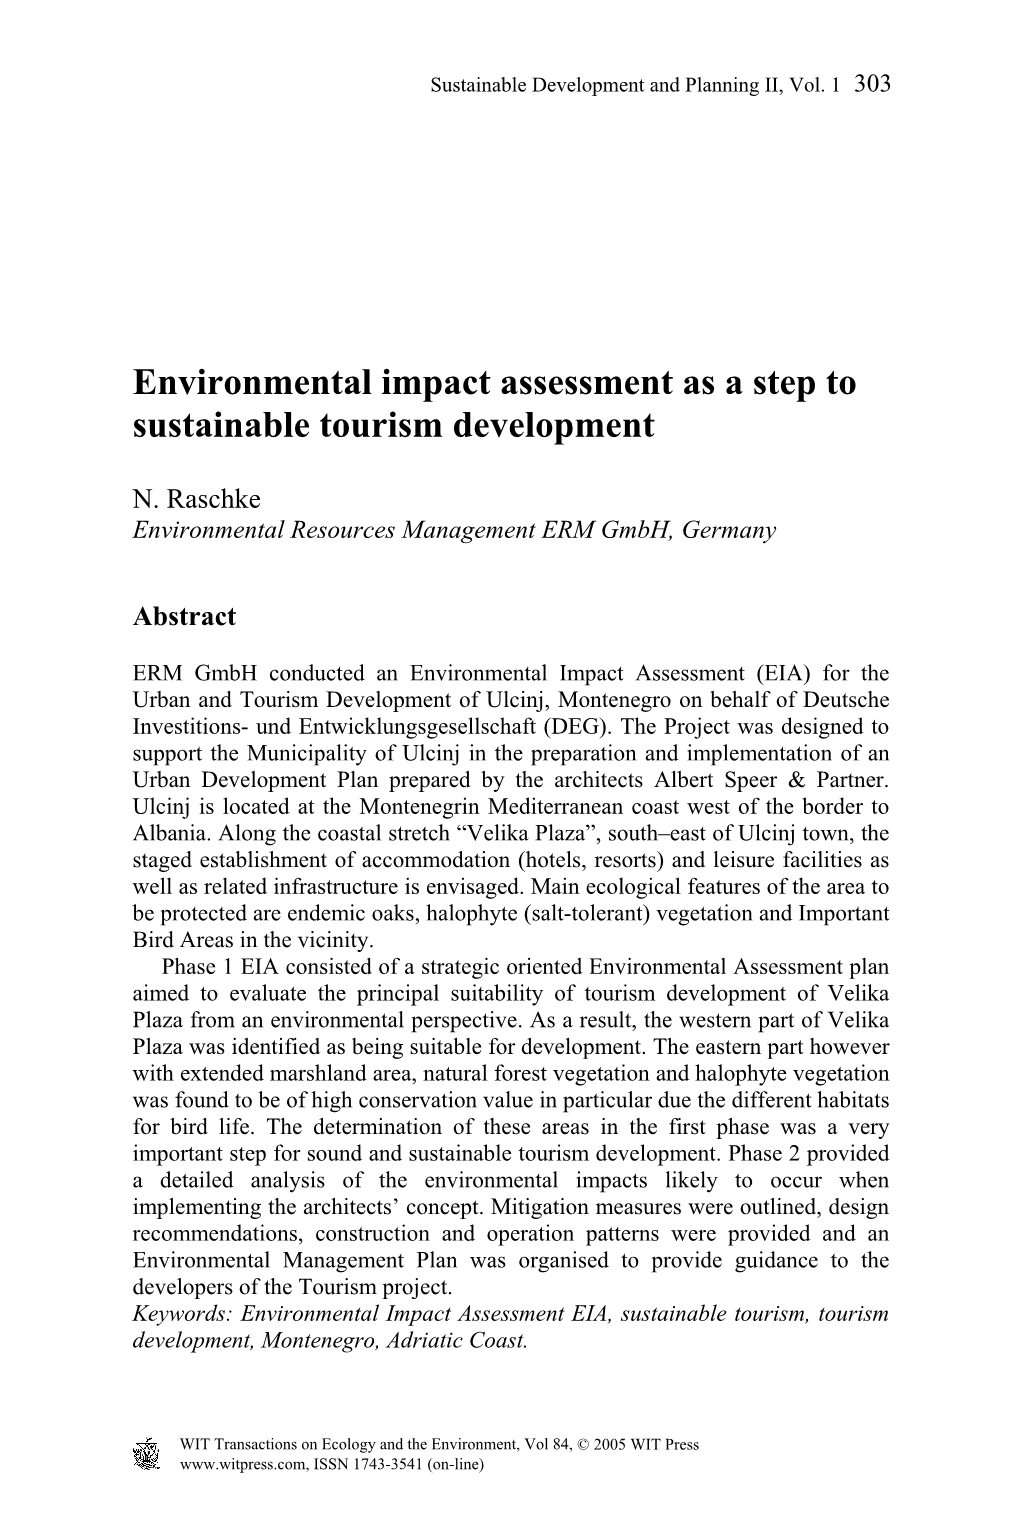 Environmental Impact Assessment As a Step to Sustainable Tourism Development